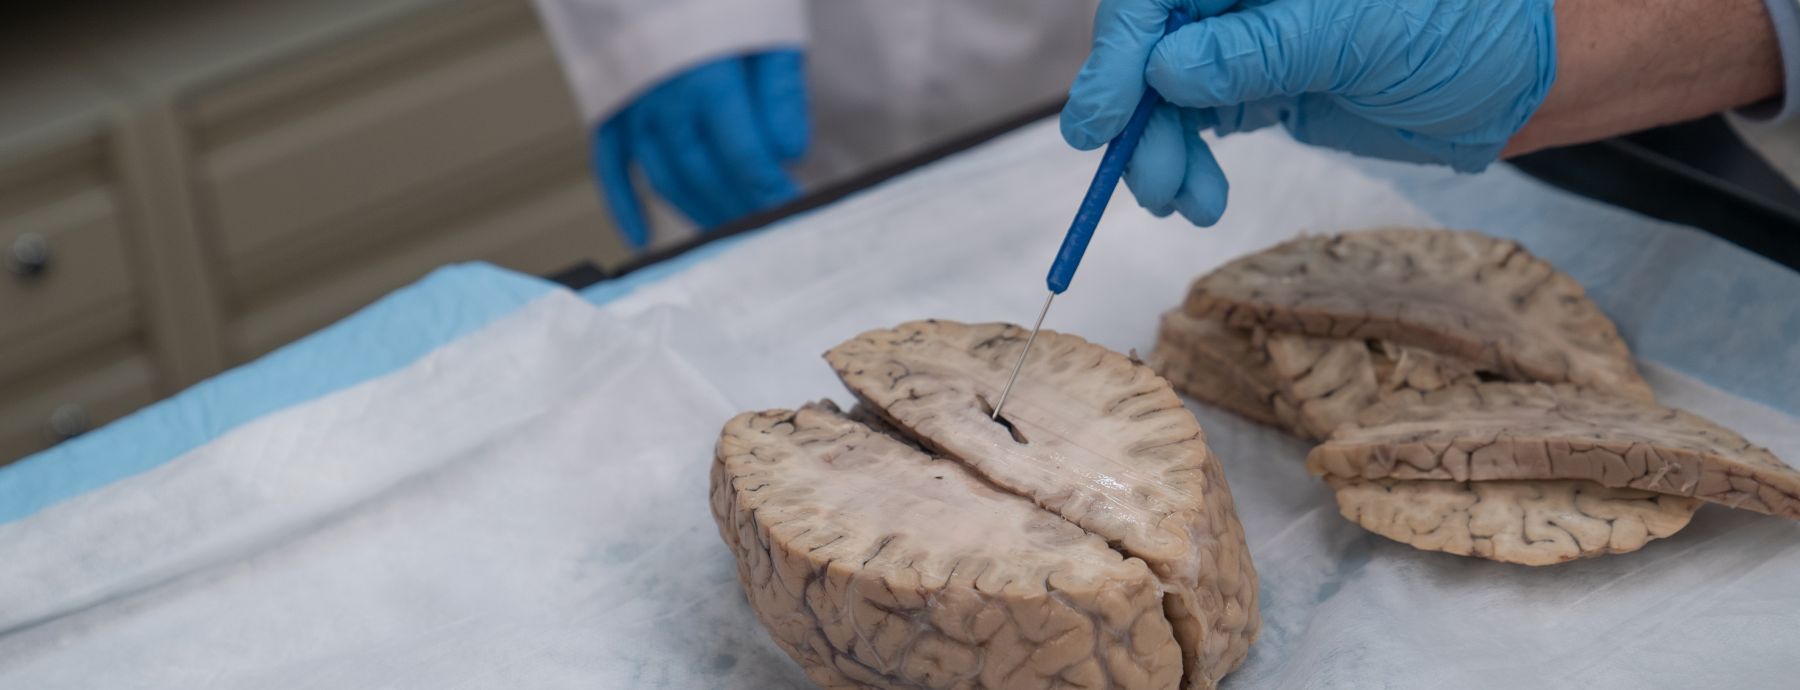 Human brain being dissected